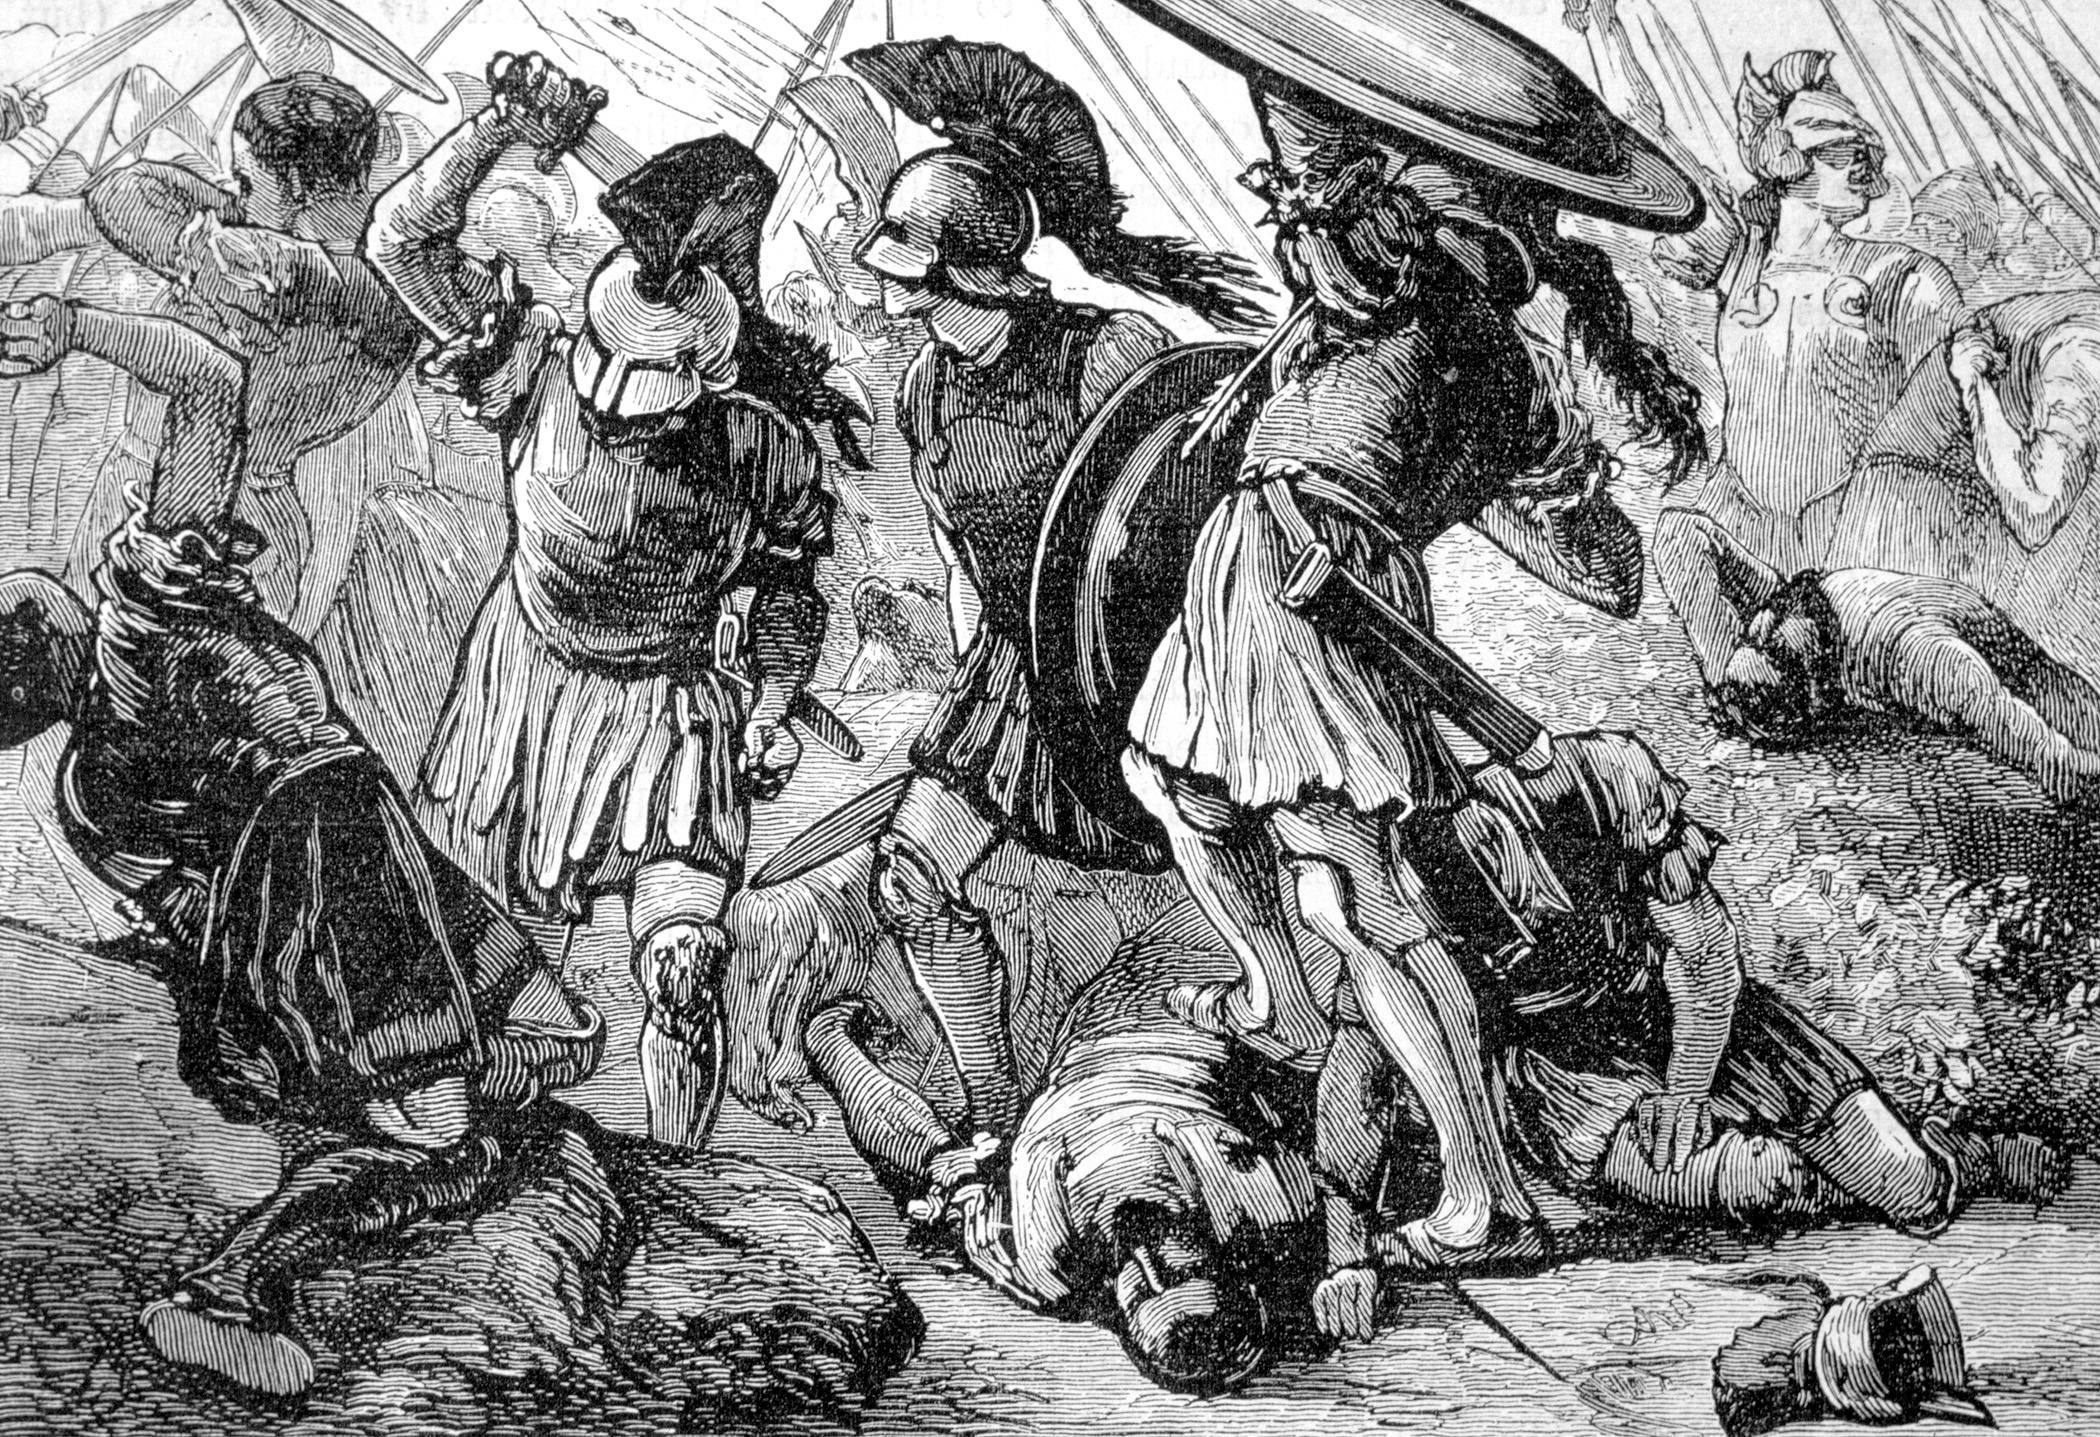 Macedonian and Theban forces under Philip II defeat the Athenians in a 19th-century engraving.